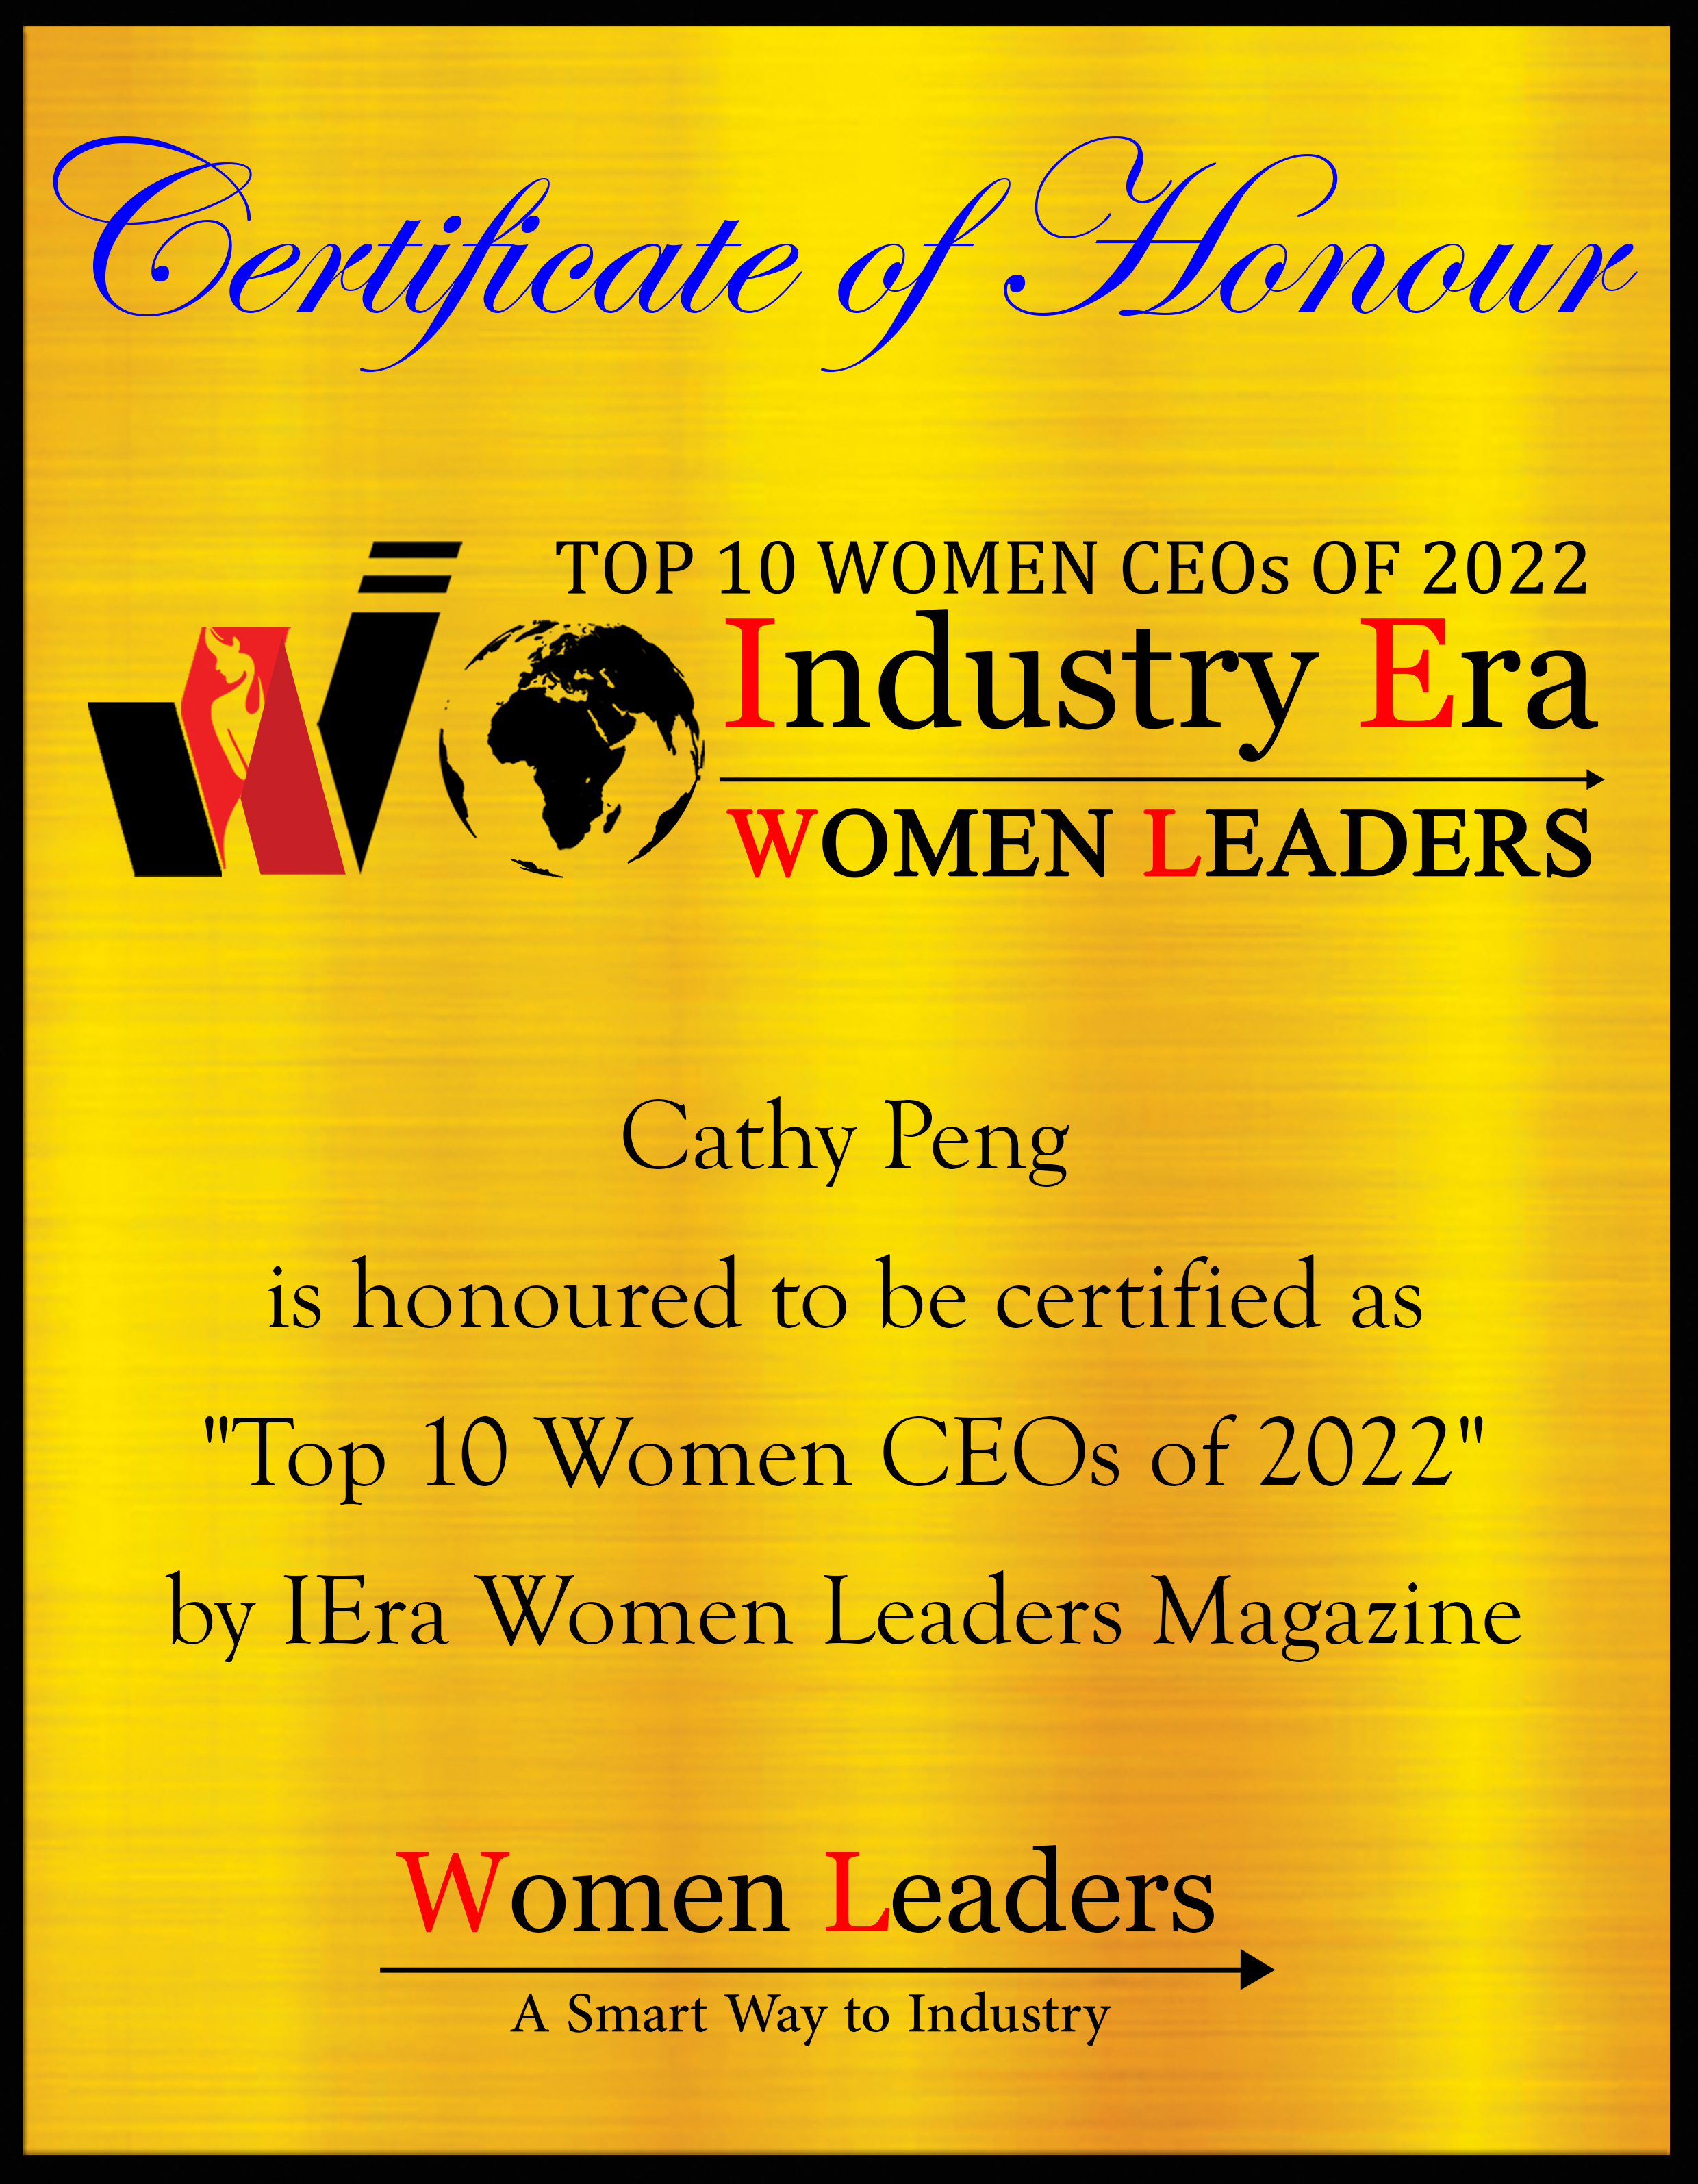 Cathy Peng, CEO of ROCS Global Inc, Top 10 Women CEOs of 2022